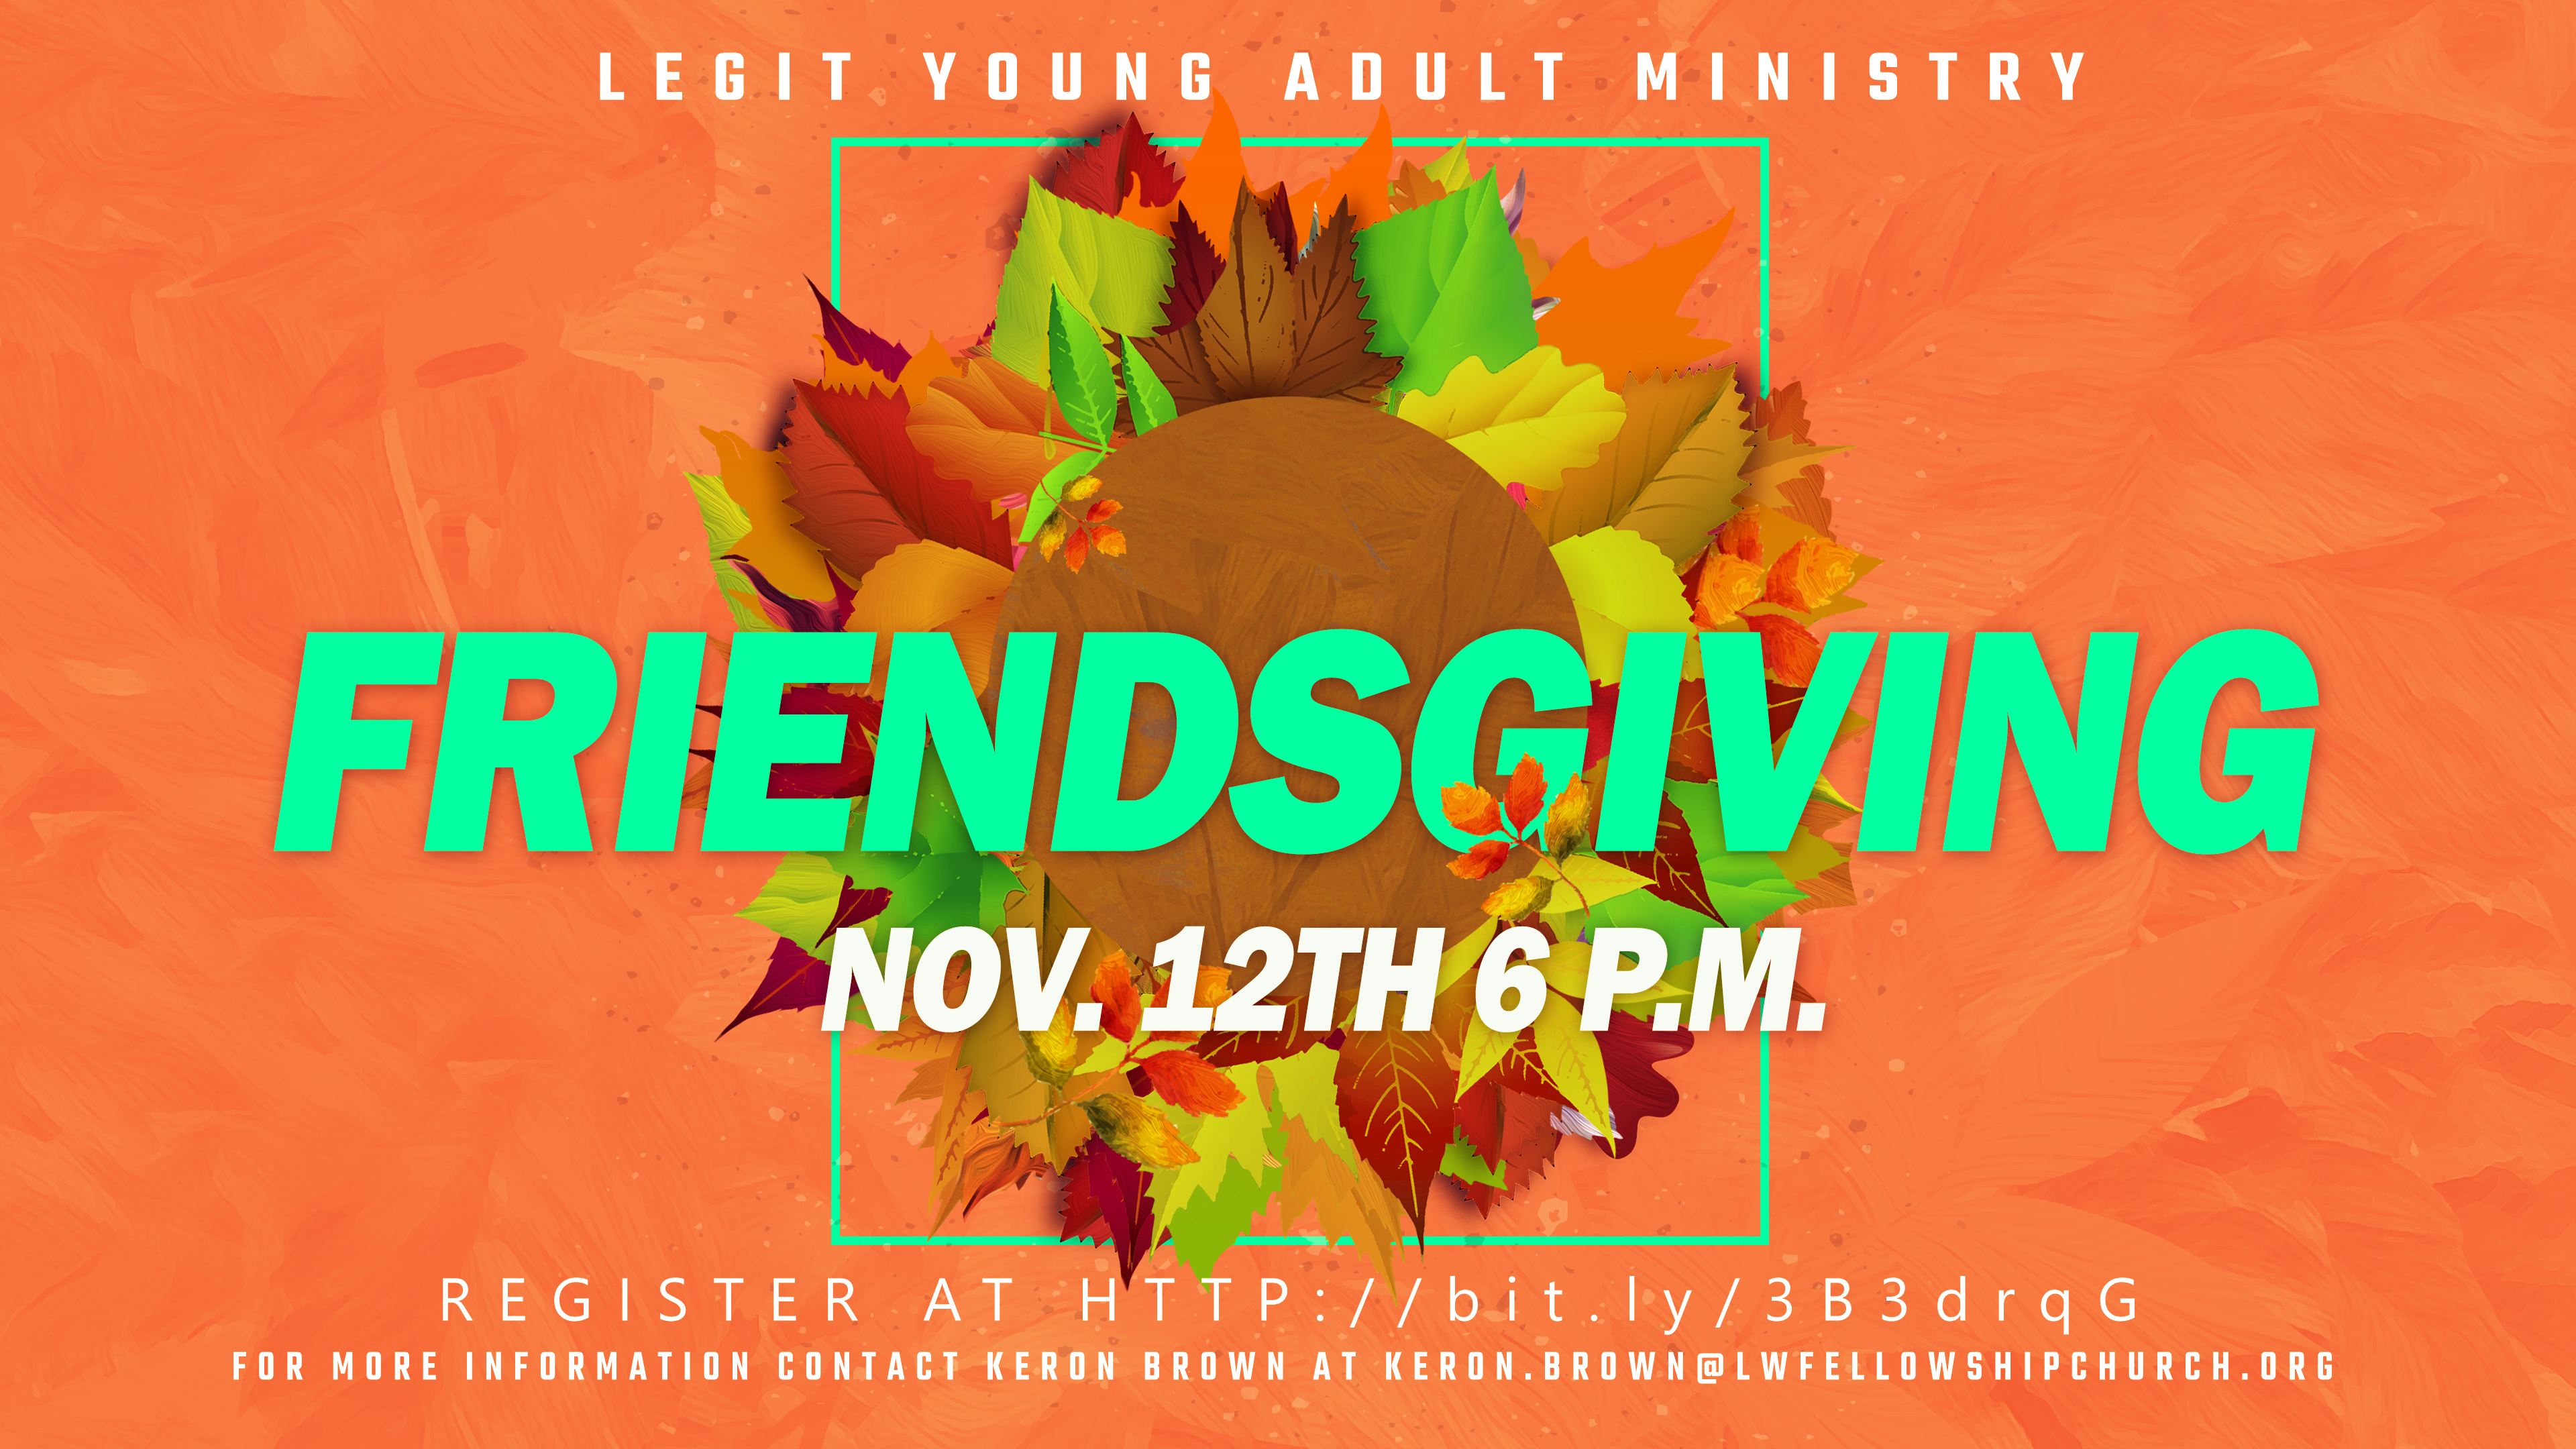 LEGIT Young Adult Ministry Friendsgiving head image